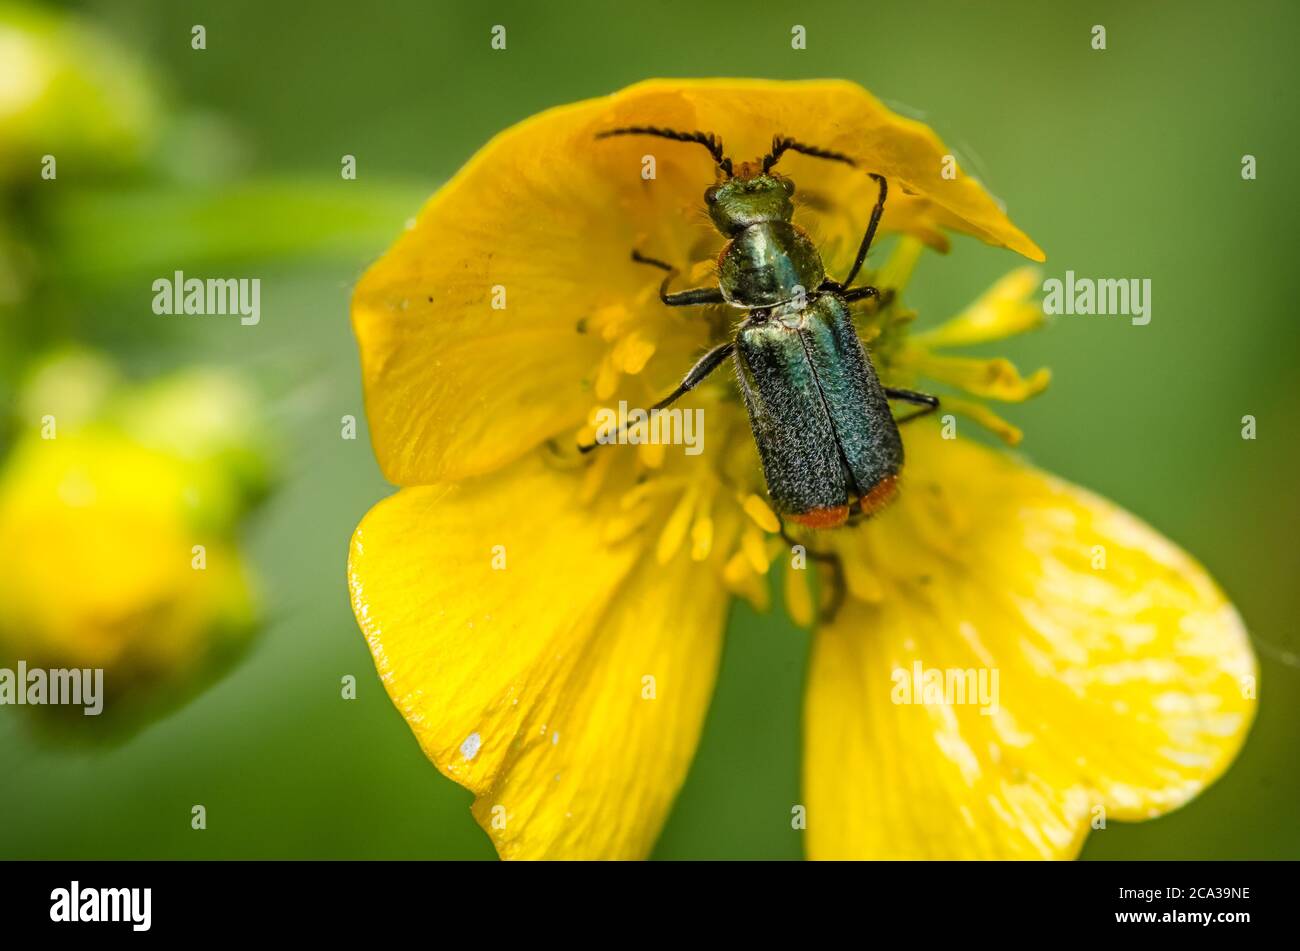 Macro of soft-wing flower beetle (Dasytinae) on Ranunculus acris, buttercup yellow flower, known as buttercups, spearworts and water crowfoots Stock Photo